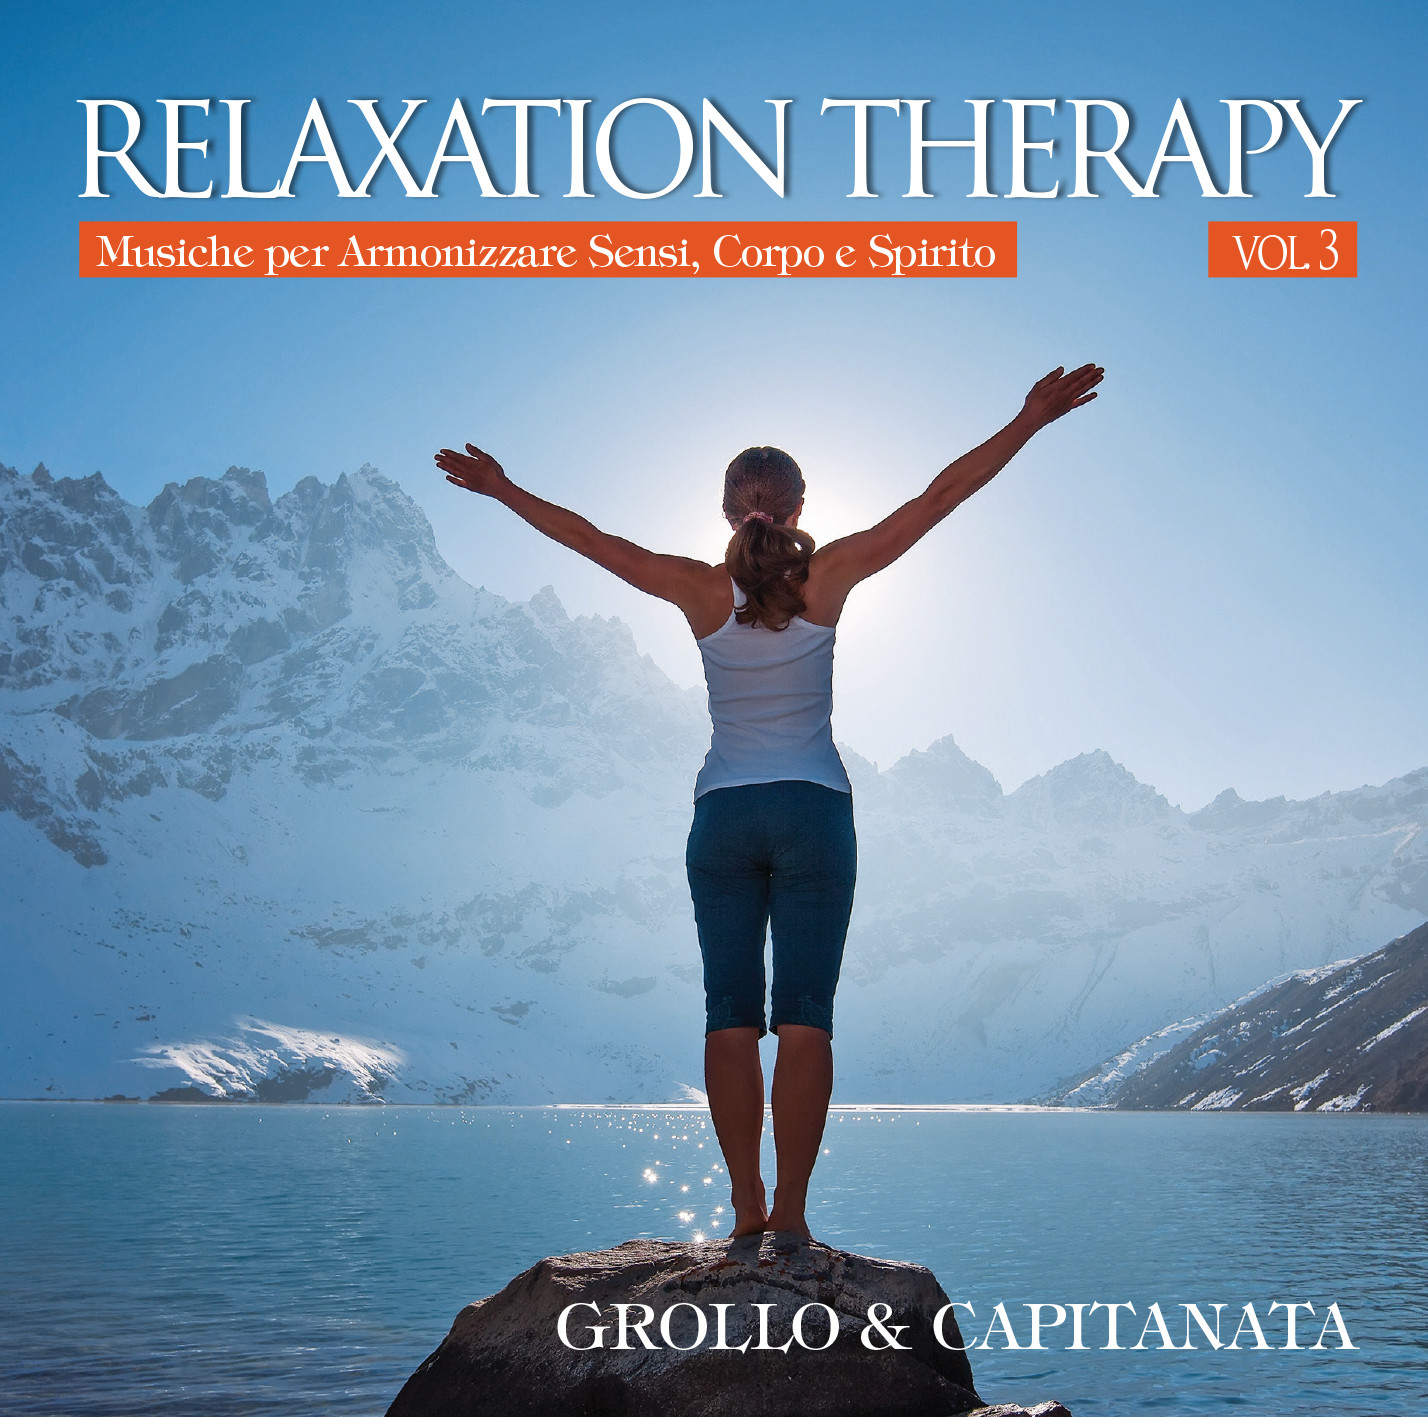 Relaxation Therapy Vol. 3